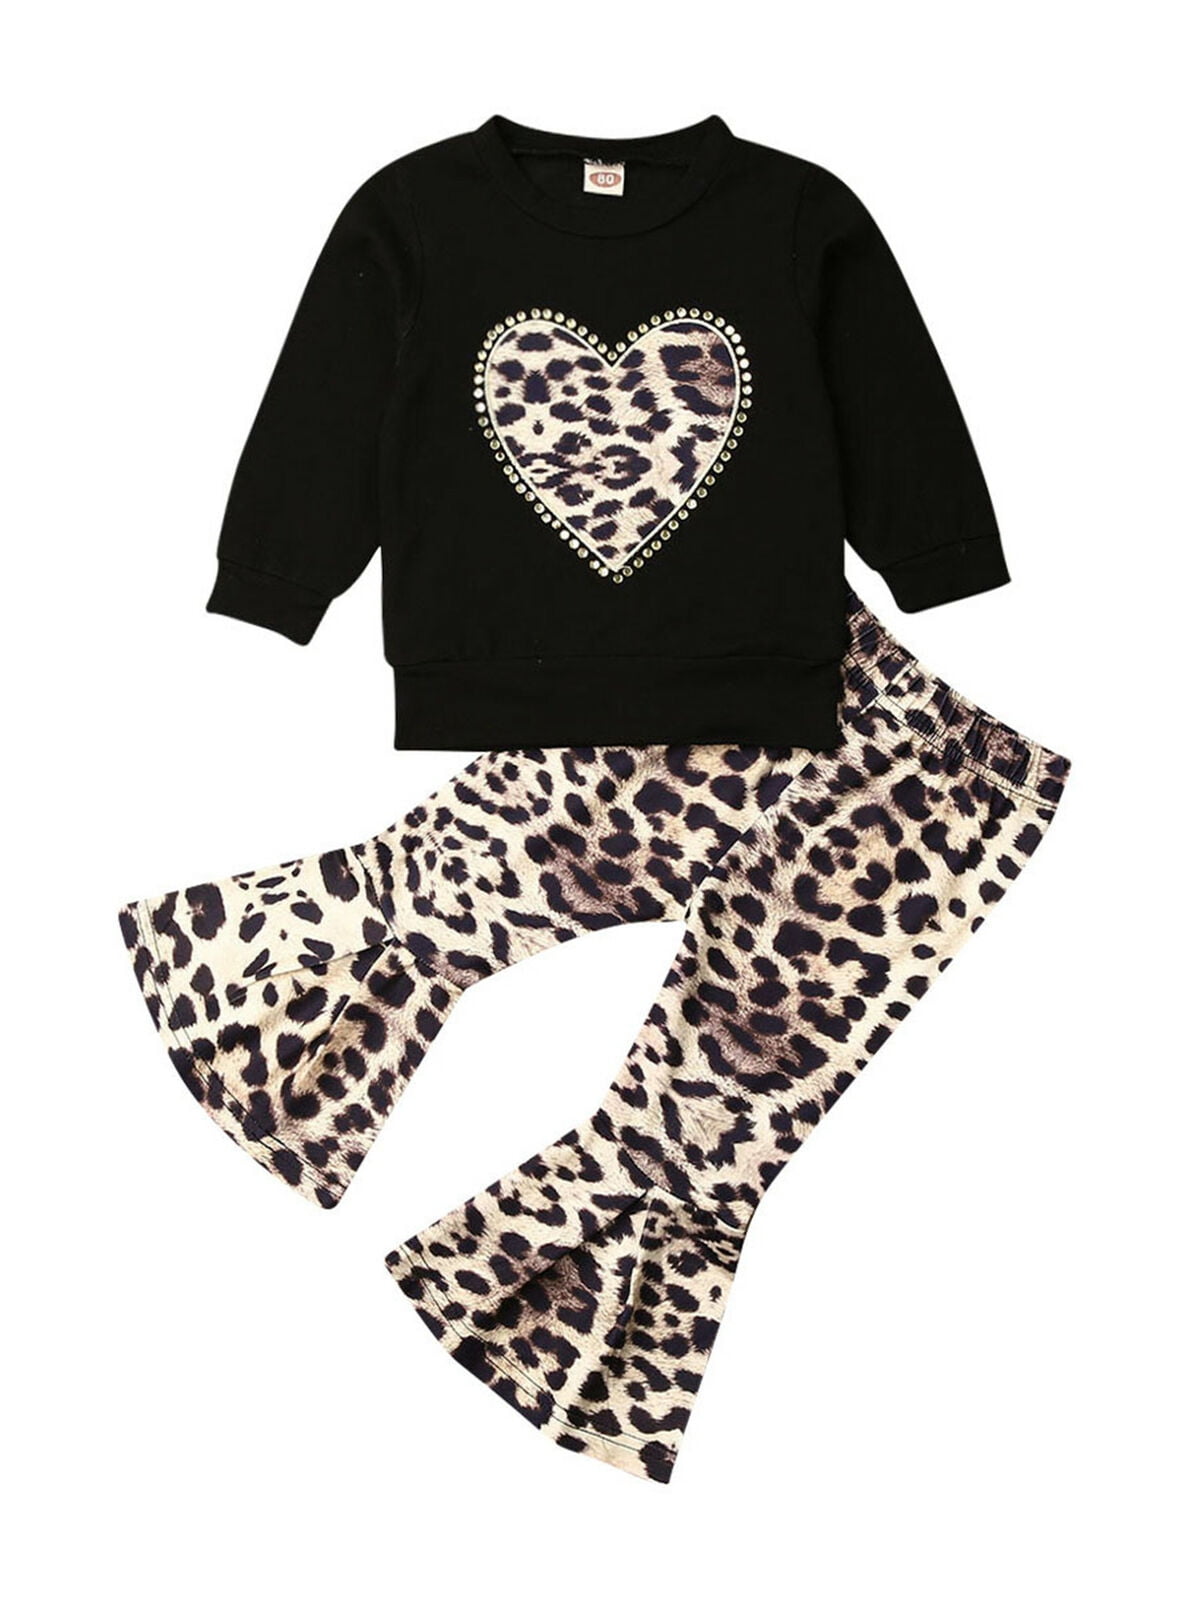 Aunavey - Toddler Baby Girl Leopard Clothes Fashion Tops T-shirt ...